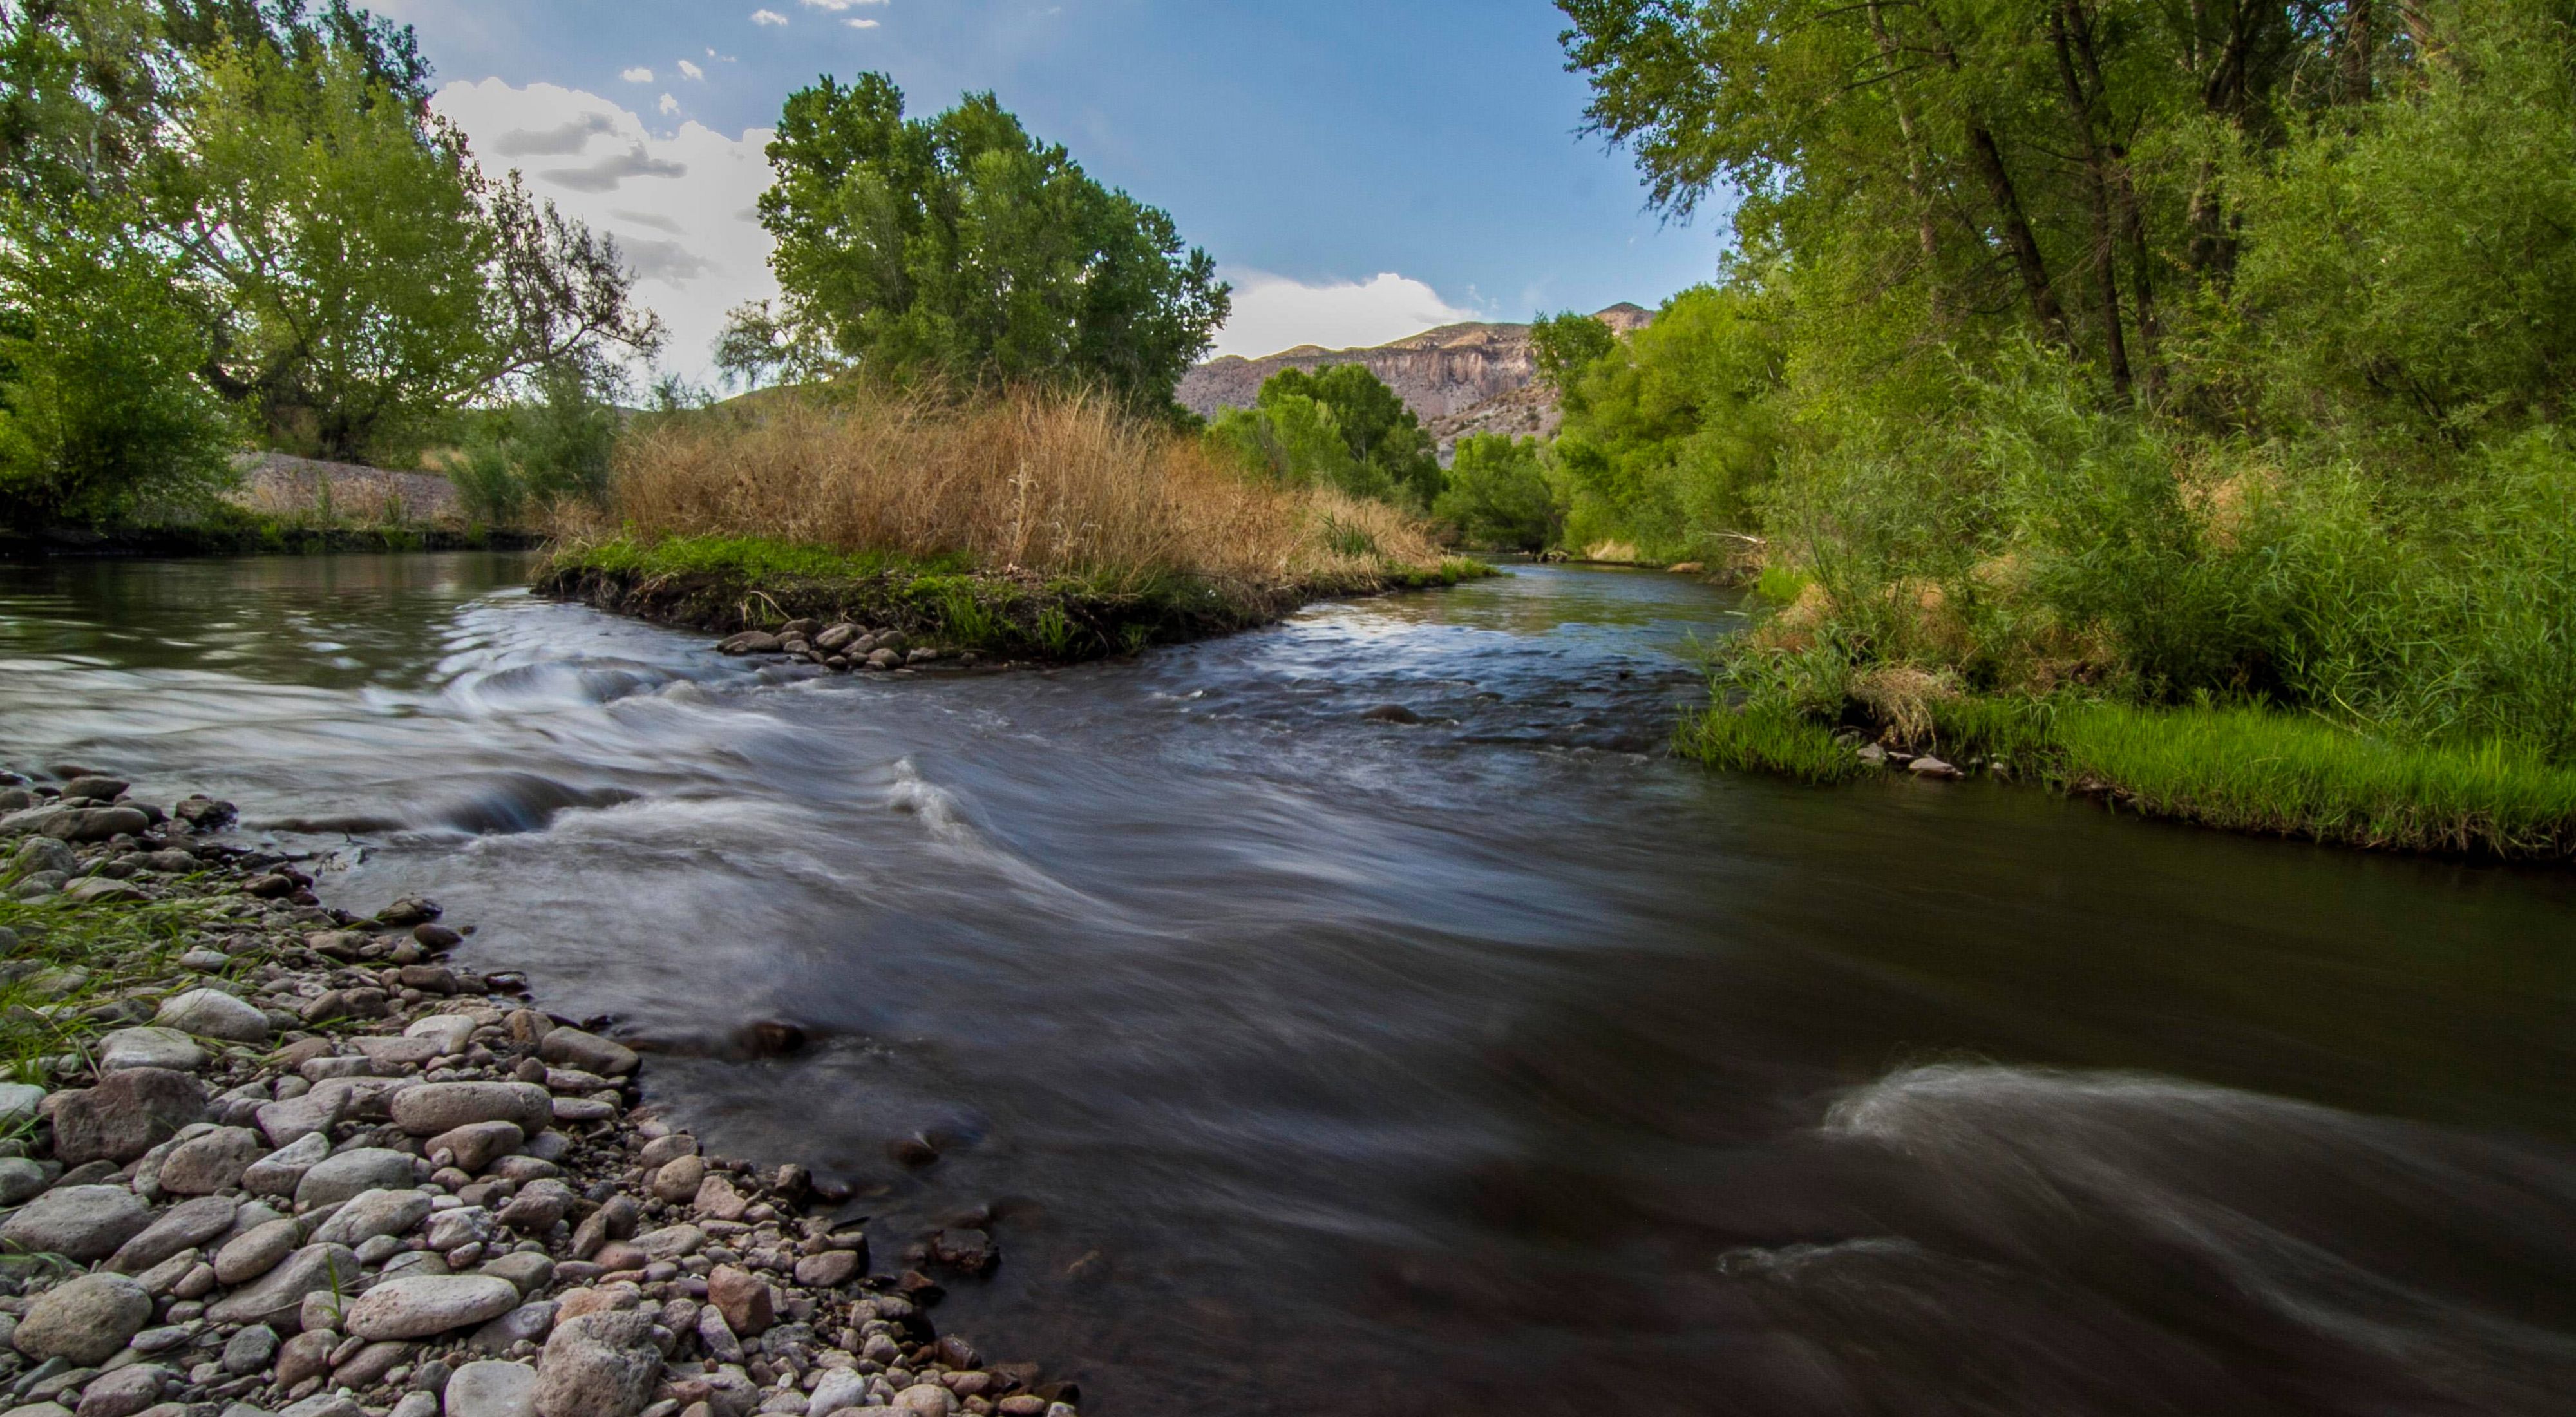 The Gila River flowing past a rocky bank in the foreground with trees and grasses on the far banks.